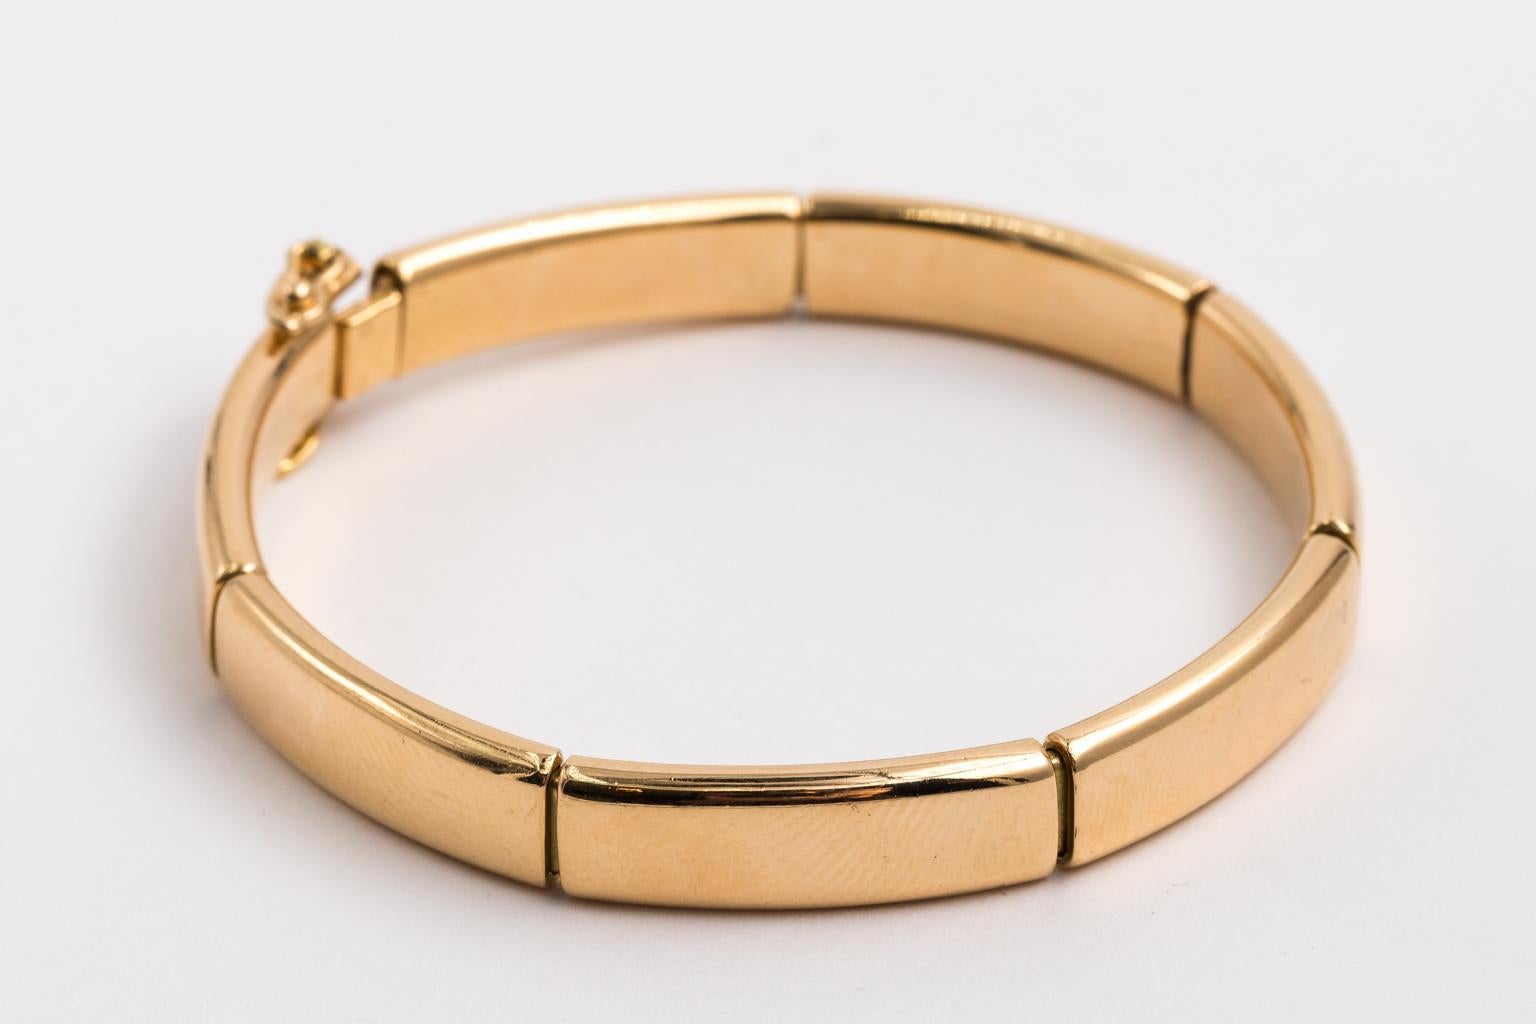 Hermes Solid 18 Karat Yellow Gold Flex Bangle Bracelet In Good Condition For Sale In St.amford, CT